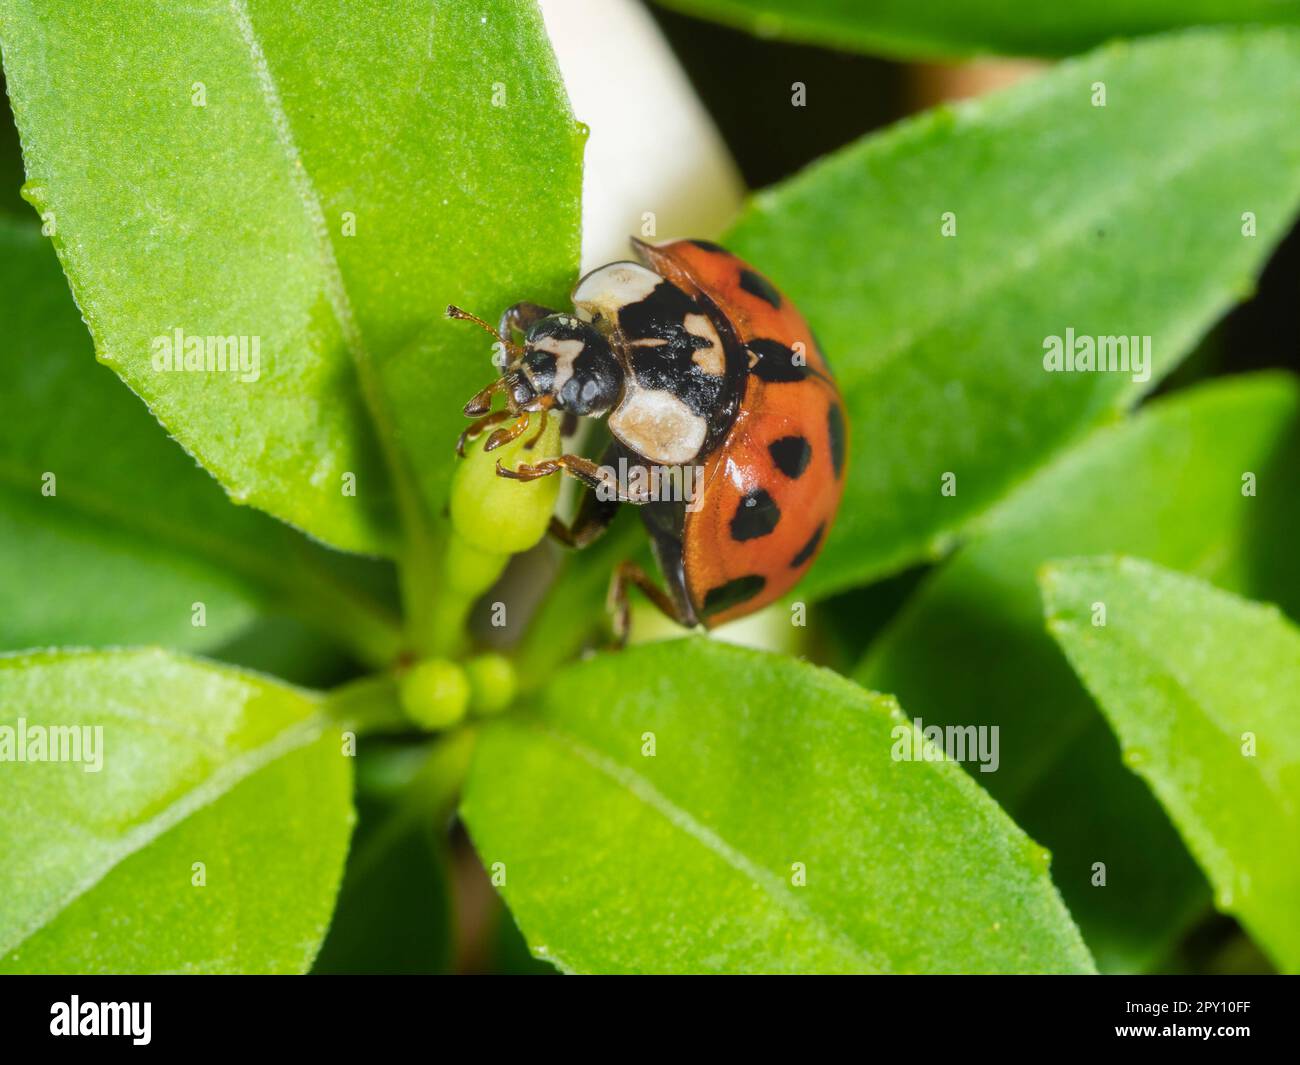 Adult, multi spotted black on red wing cases of the invasive in the UK harlequin ladybird, Harmonia axyridis var succinea Stock Photo